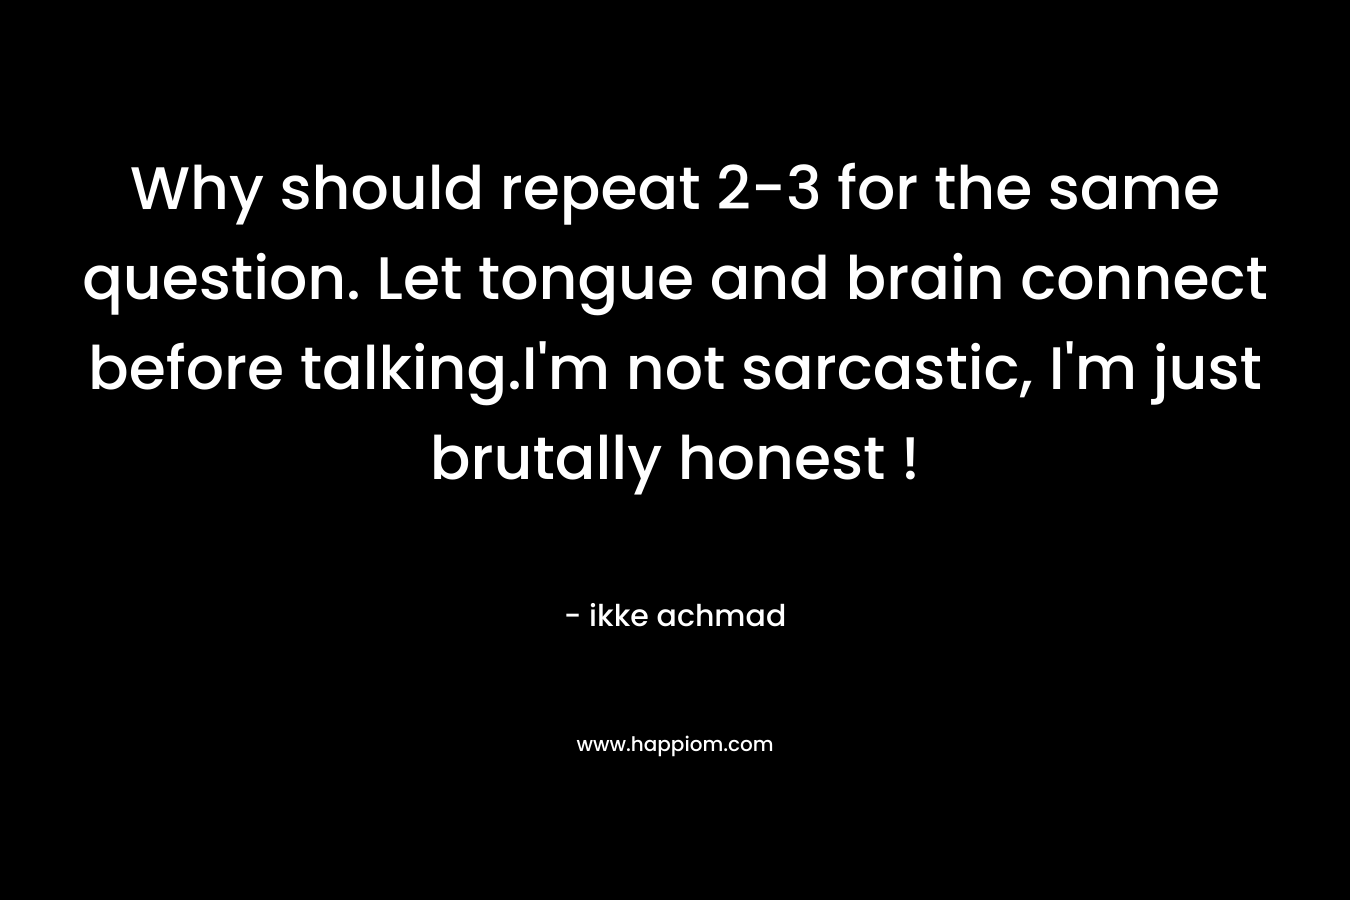 Why should repeat 2-3 for the same question. Let tongue and brain connect before talking.I'm not sarcastic, I'm just brutally honest !